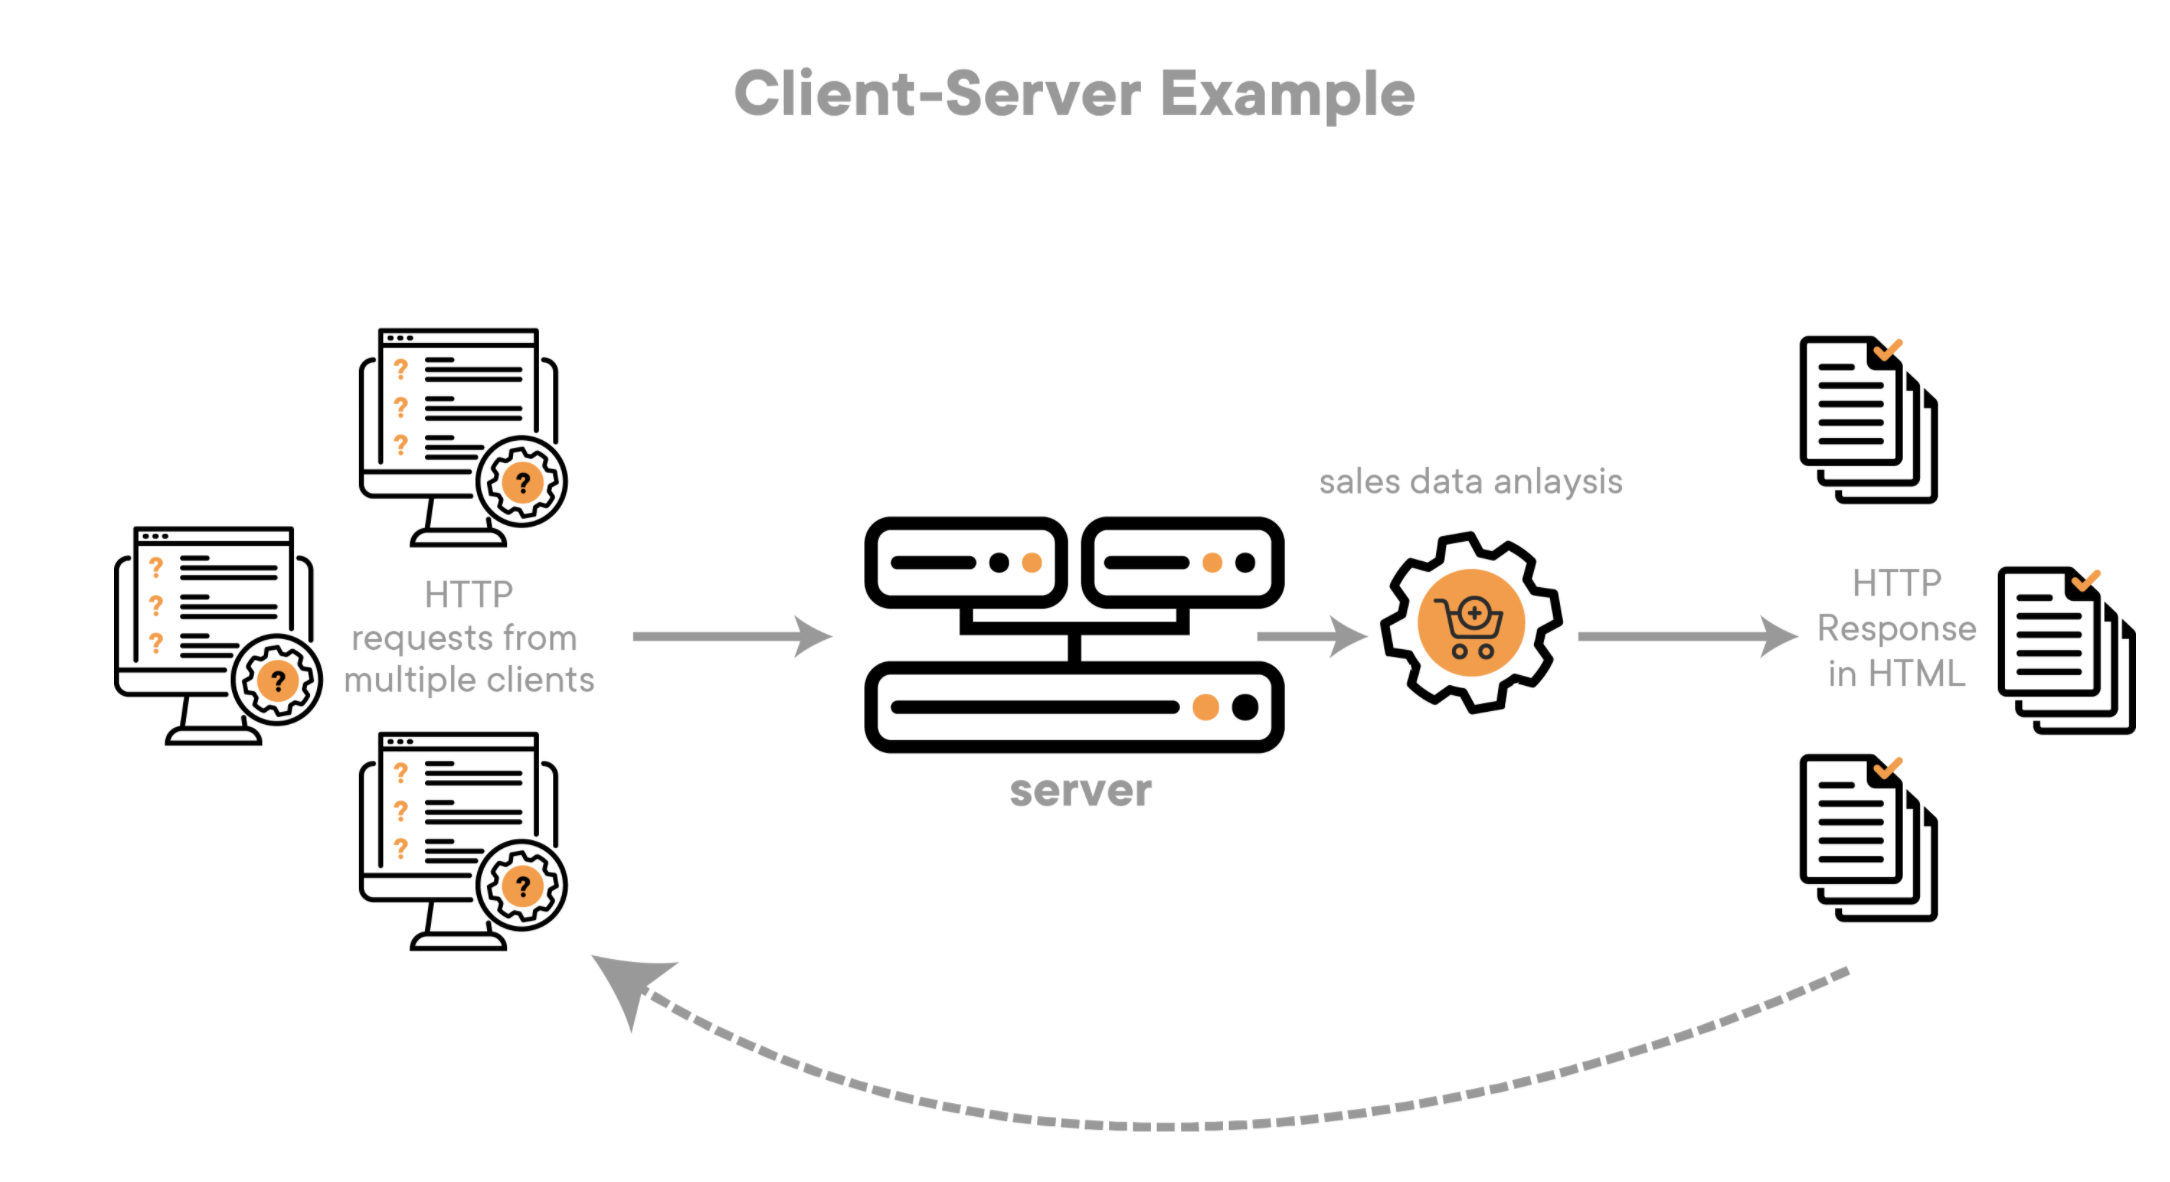 Client-Server Example